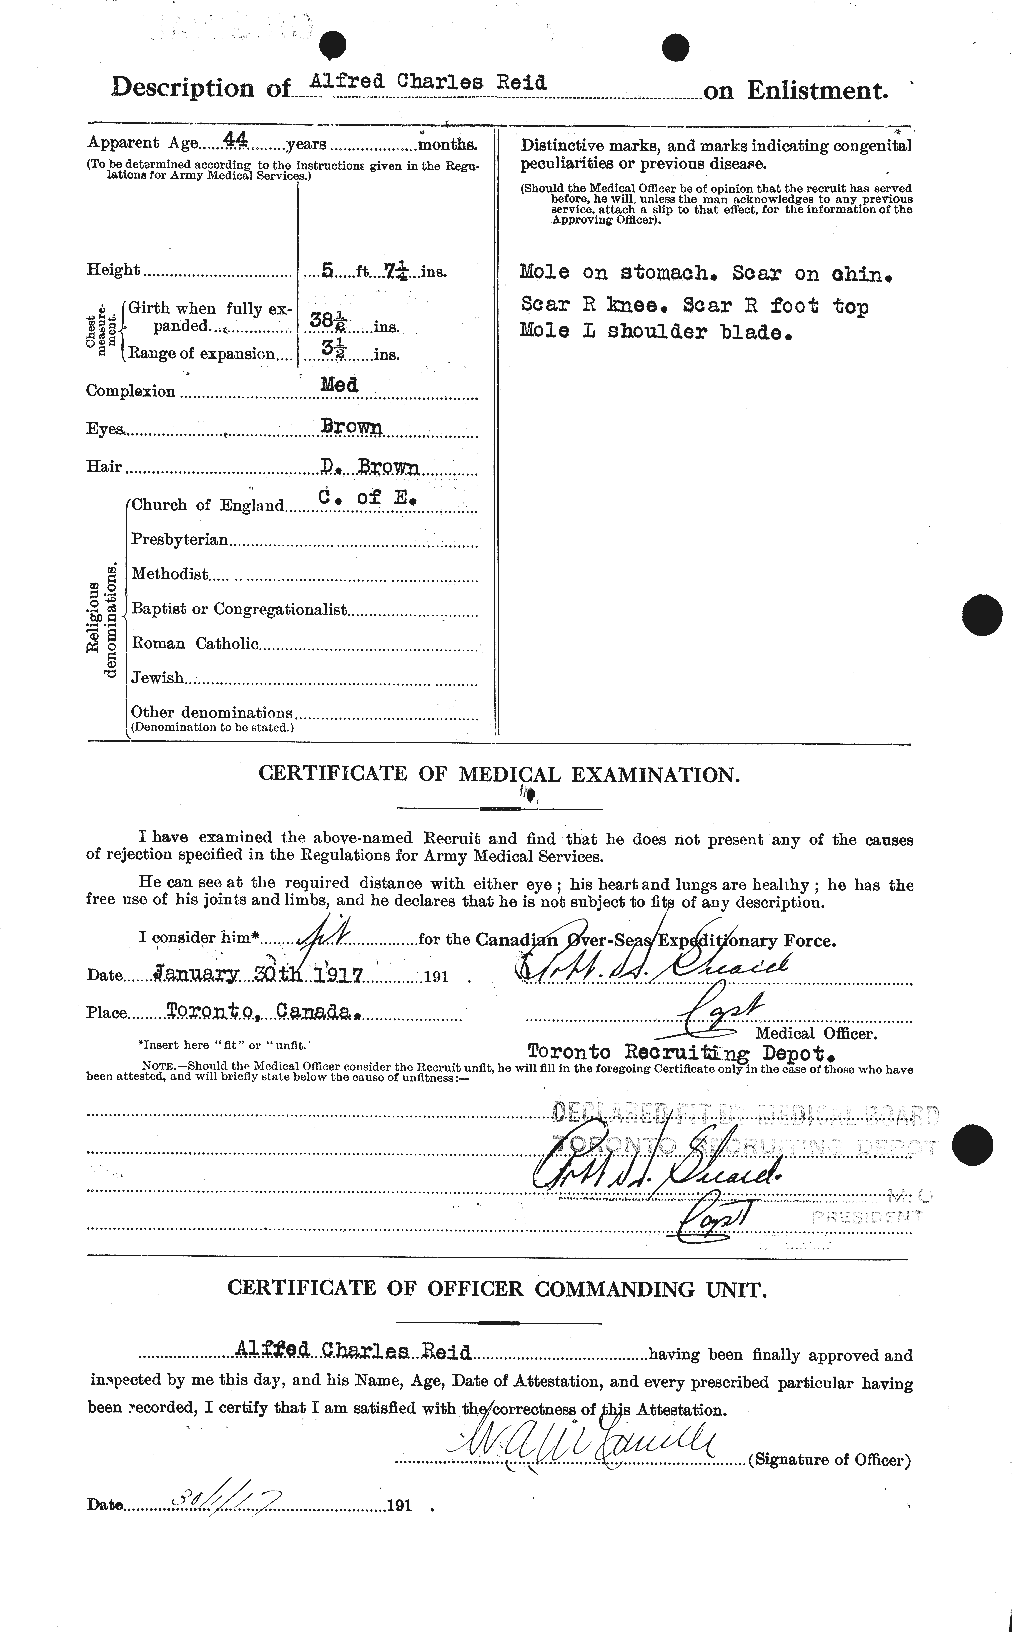 Personnel Records of the First World War - CEF 597792b